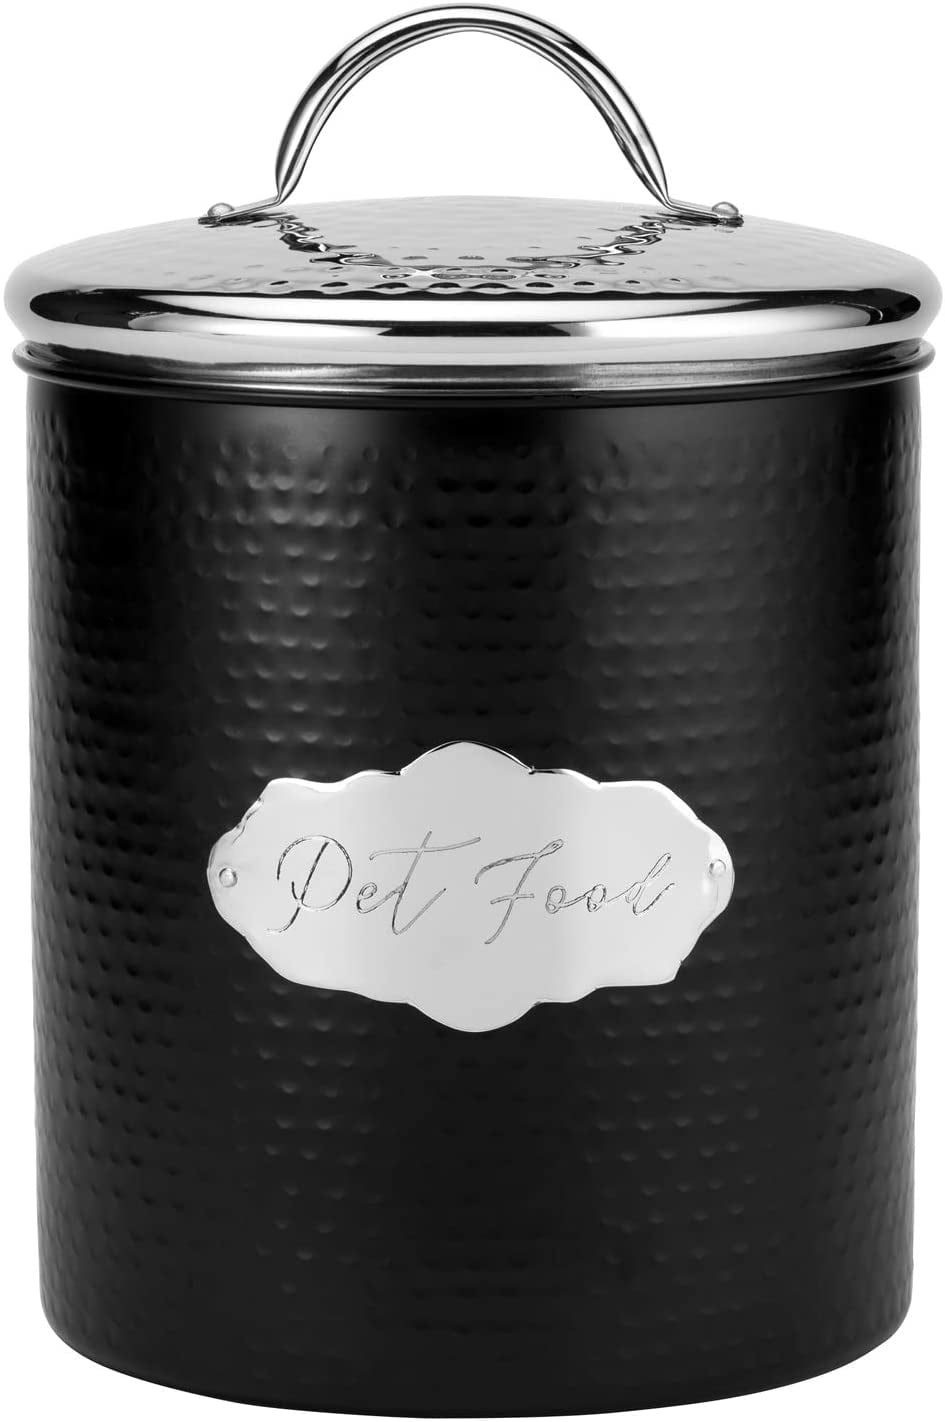 Amici Home A7CDI027R Farmers Market Metal Storage Canister White 76 oz 